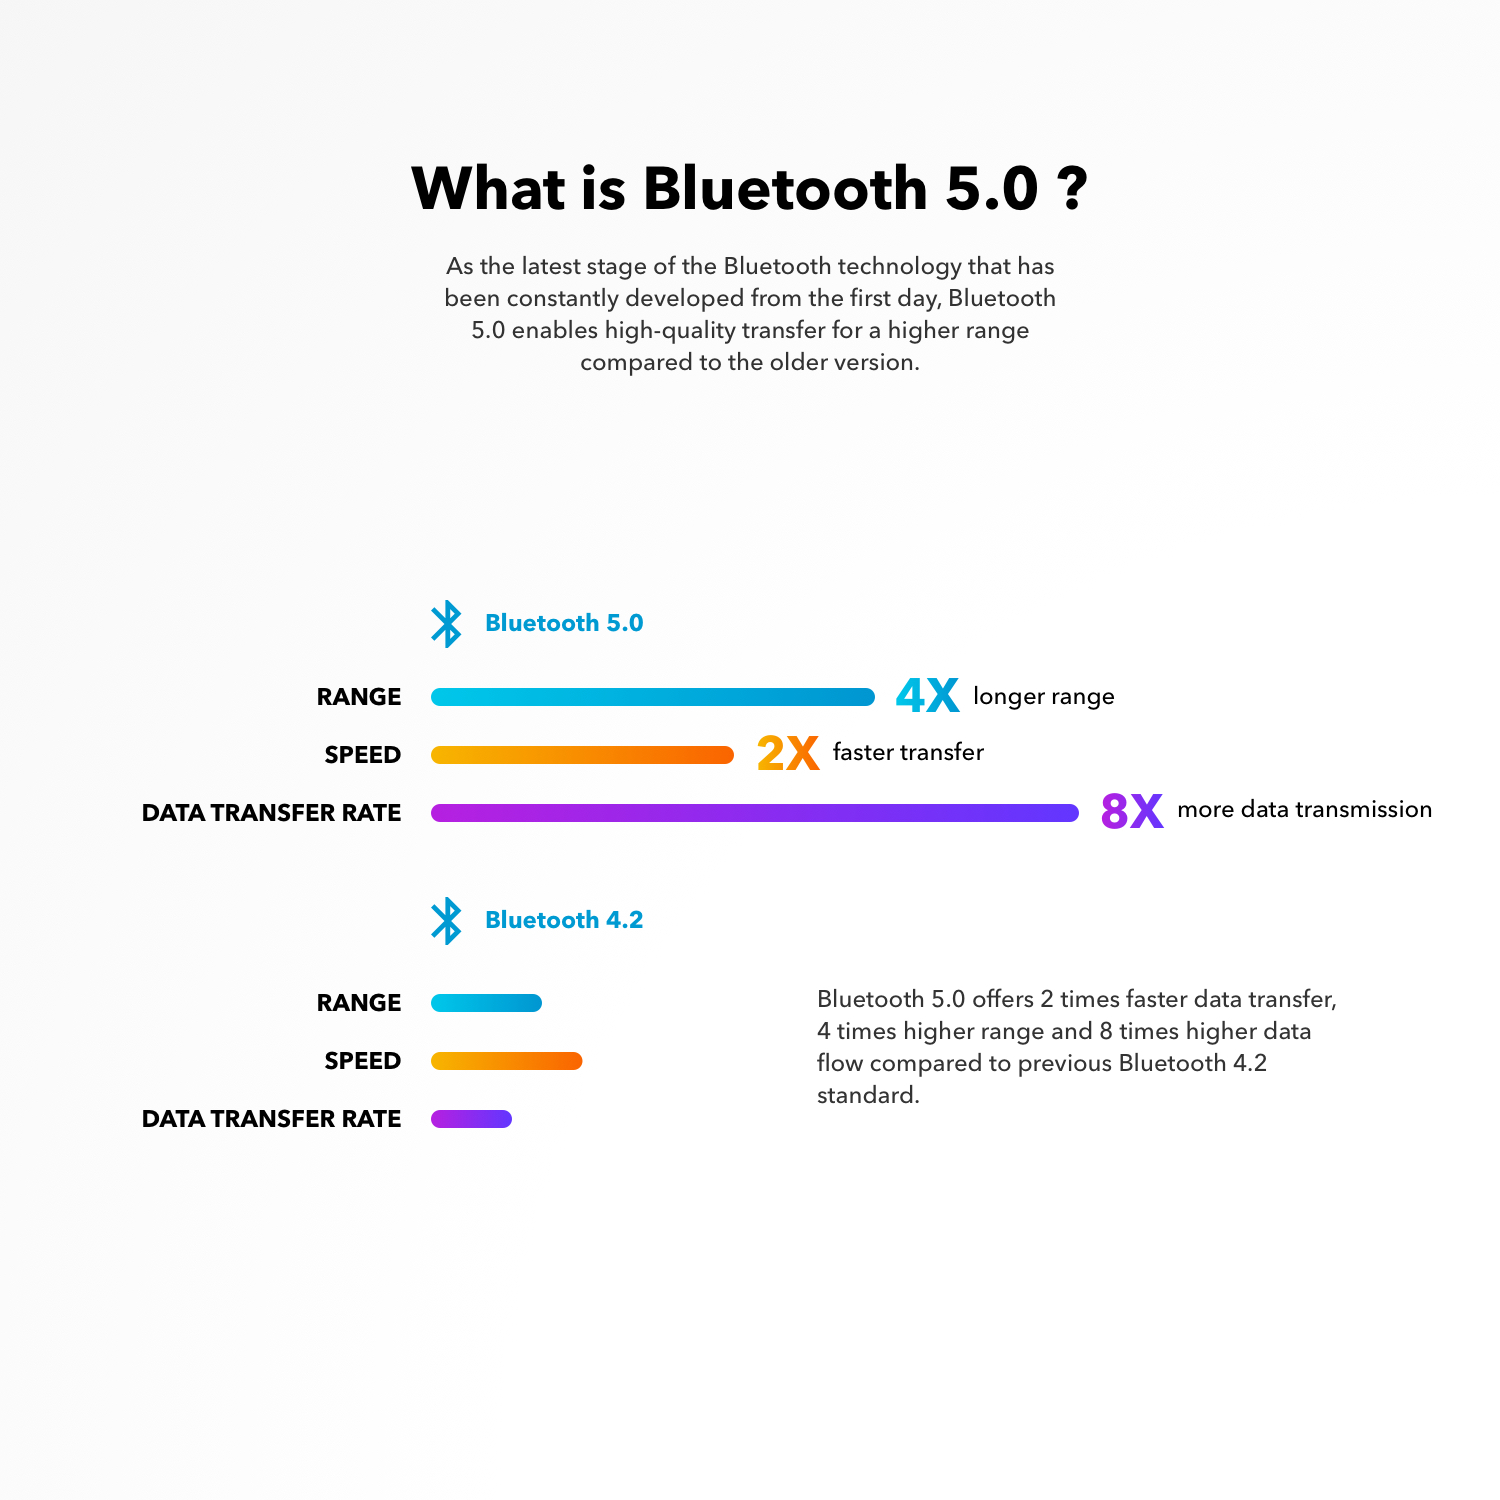 What is Bluetooth 5.0